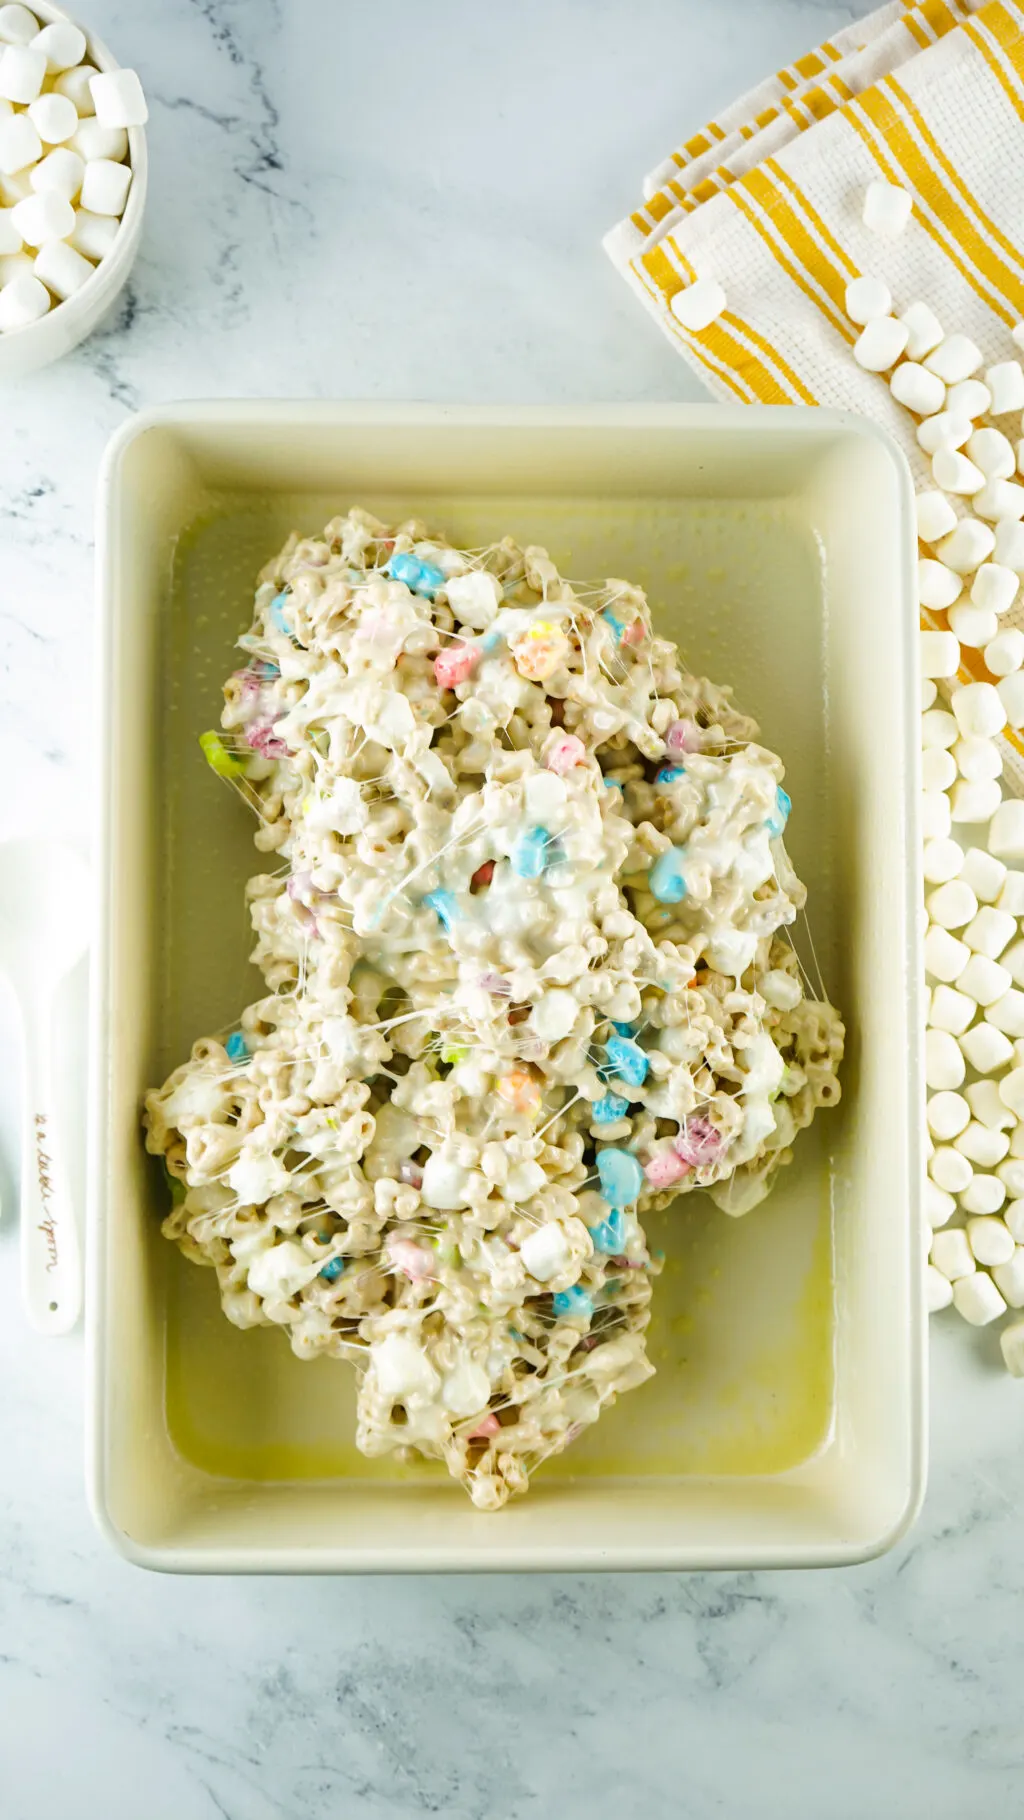 lucky charms rice krispies spread into pan